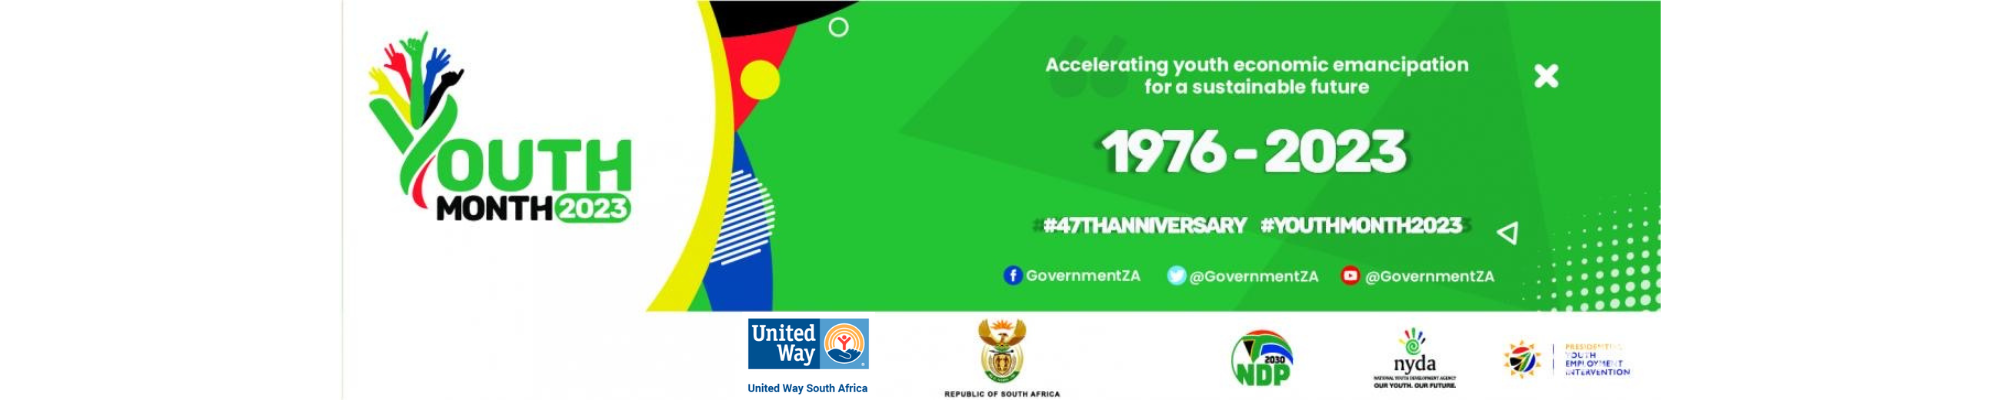 Youth Month 2023